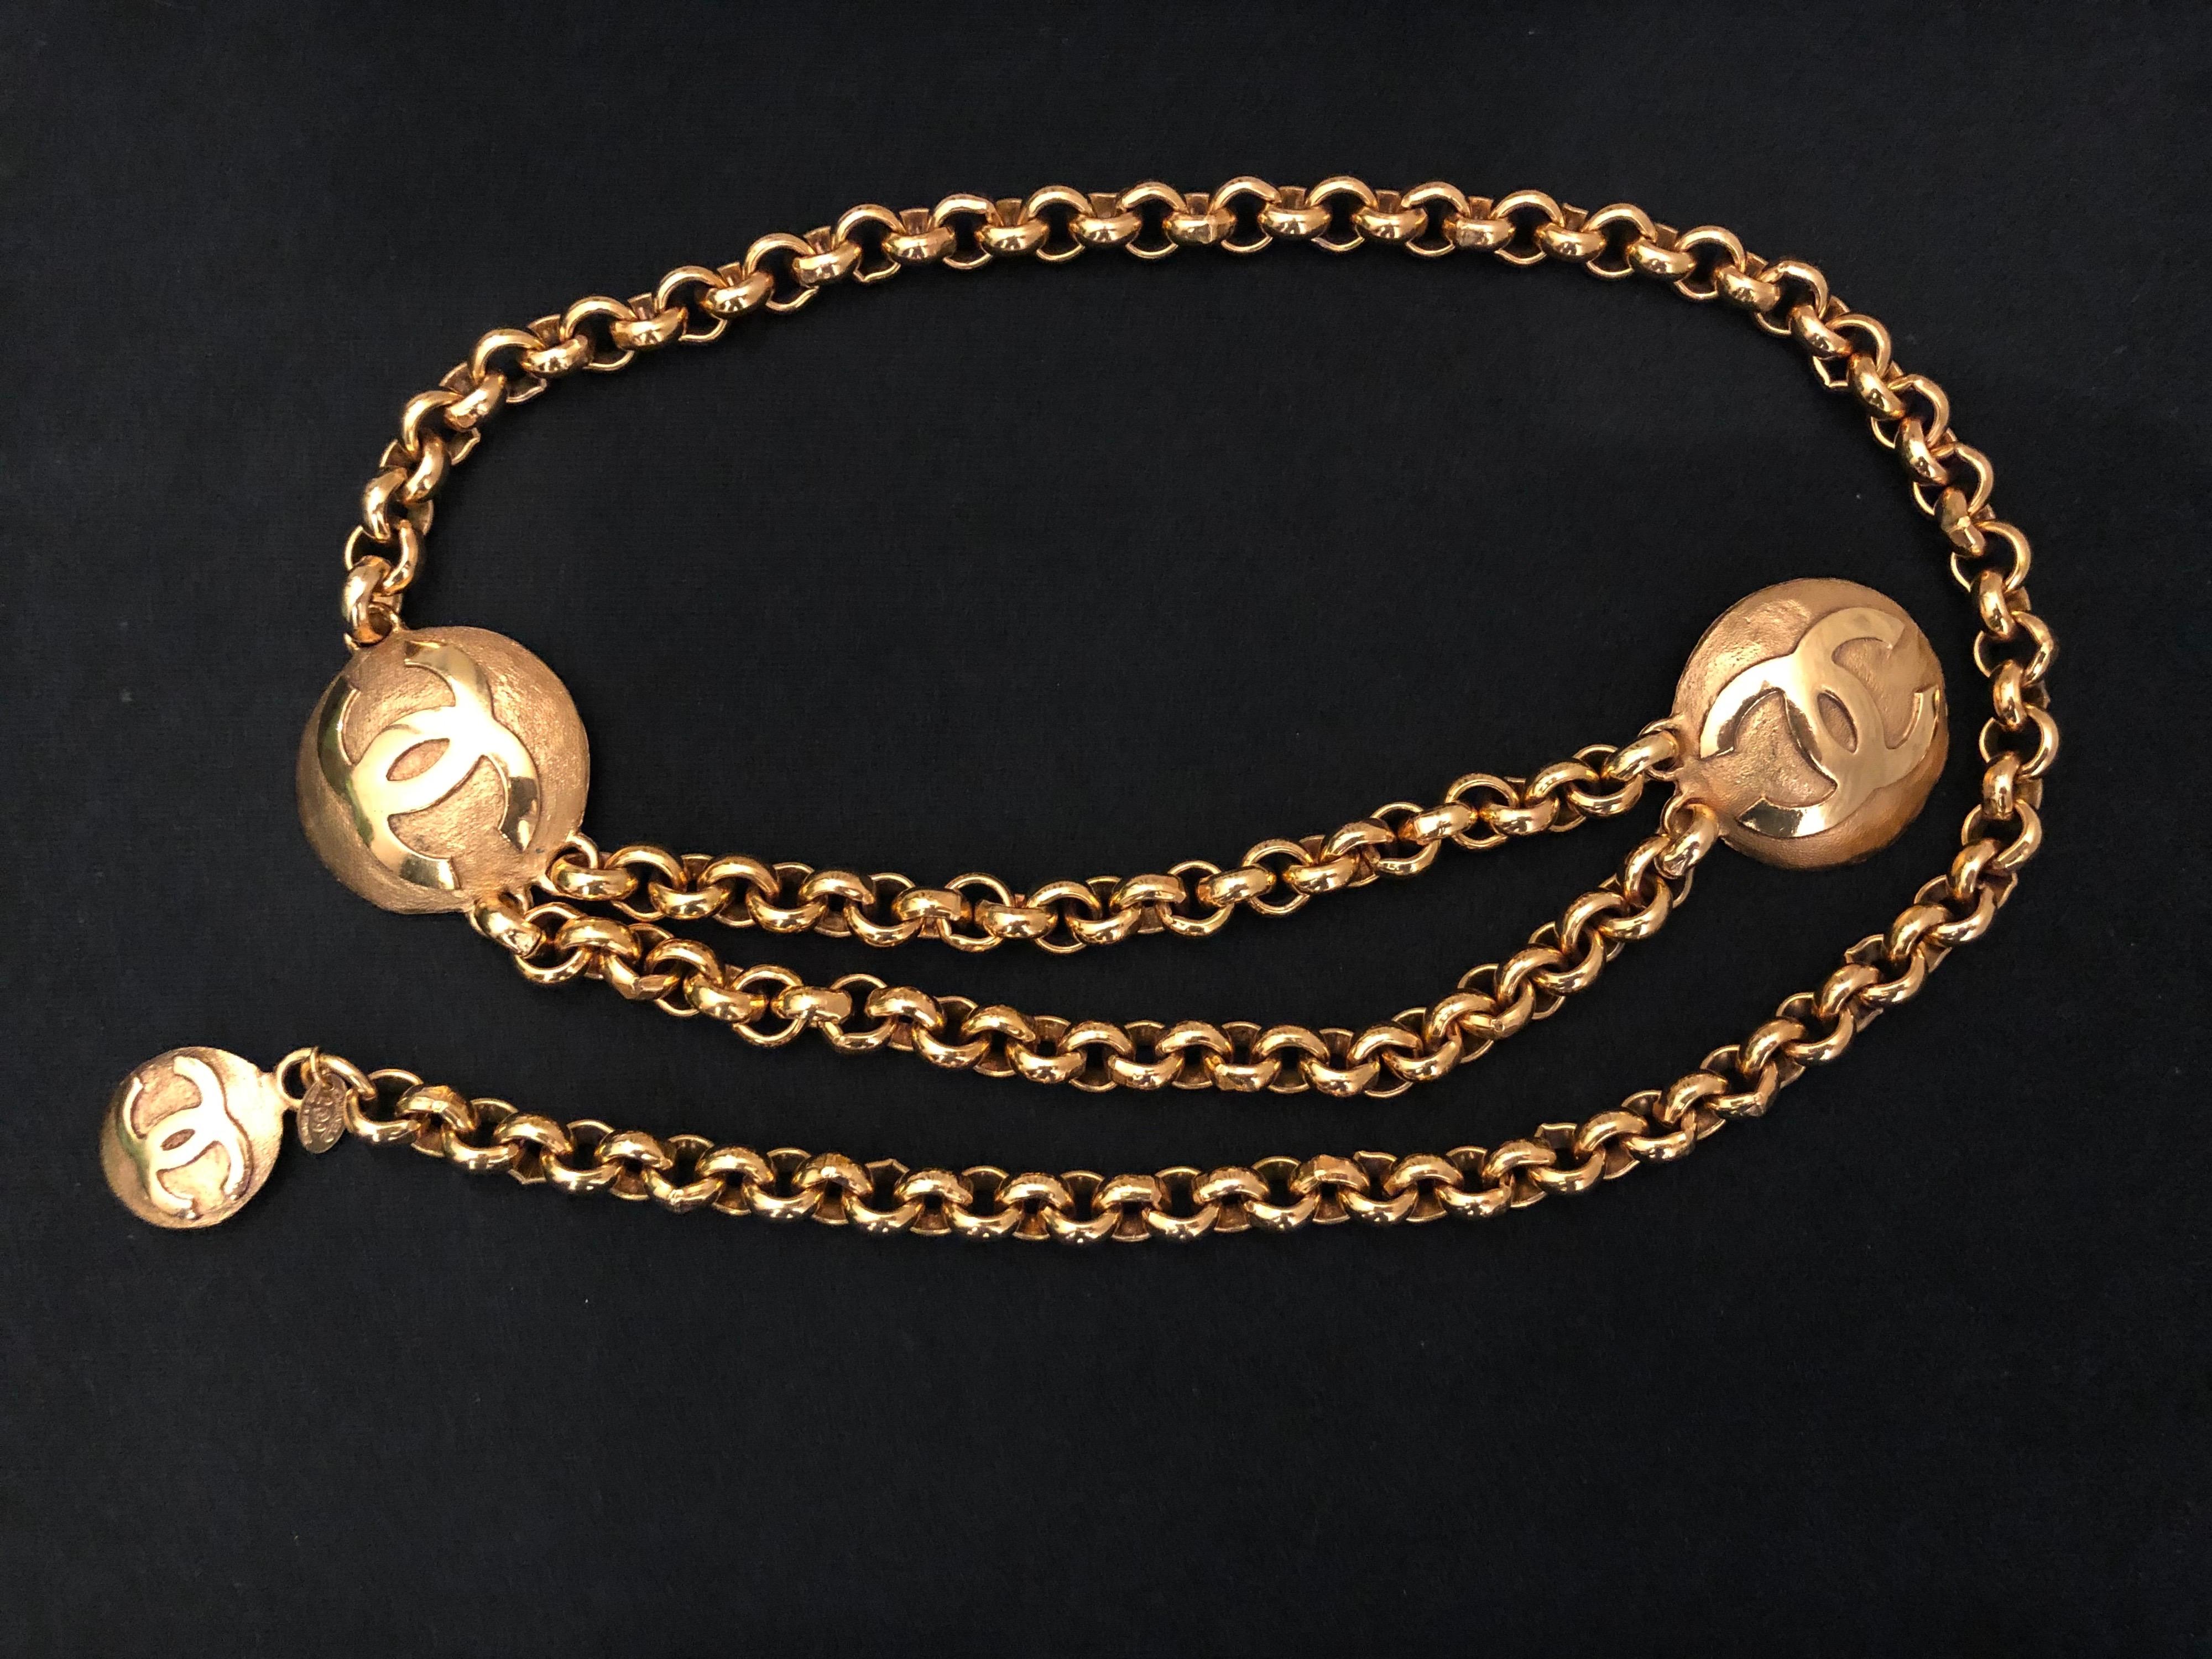 Early 1990s Chanel gold toned chain belt with double front chain featuring two large CC medallions and a small CC medallion charm. Measure 78.5 cm in wearable length medallions 4 cm and 2.3 cm in diameter. Stamped Chanel 29 made in France. Comes